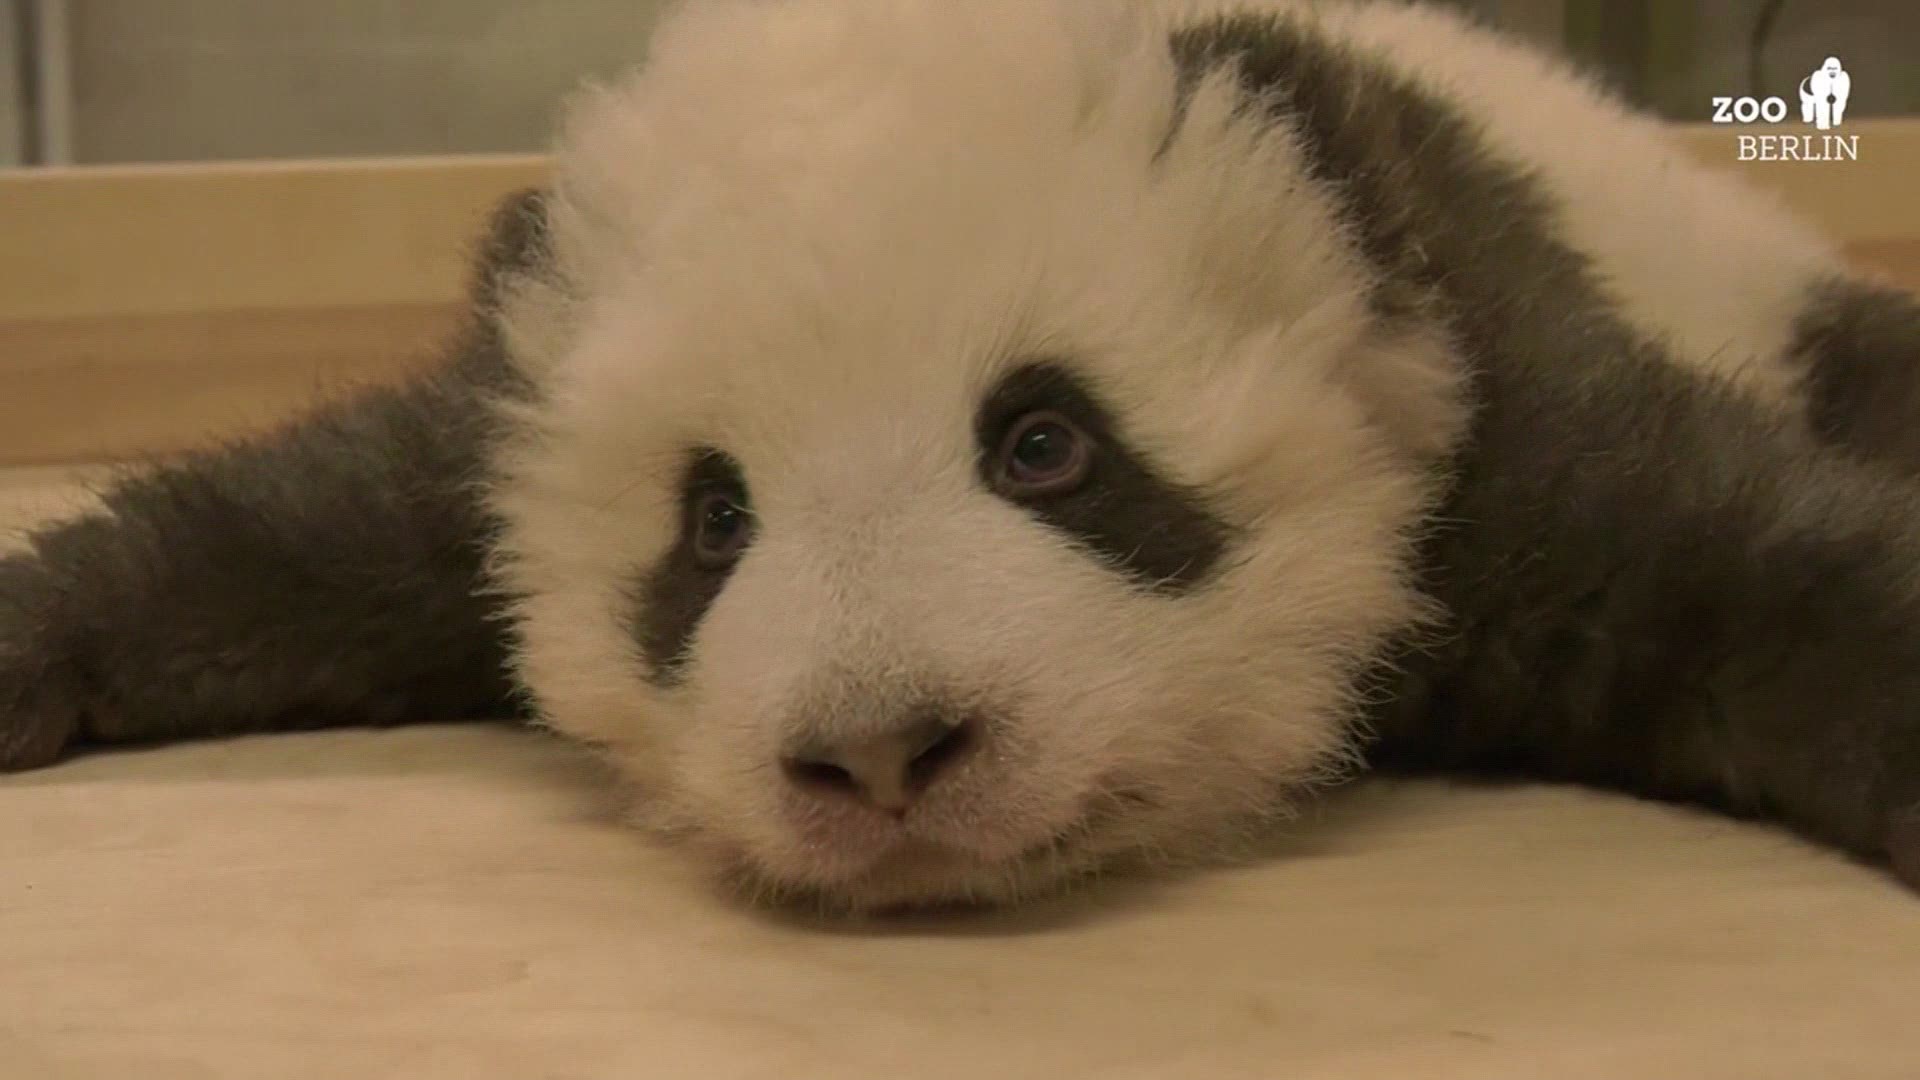 Panda twins born in Berlin in early September are doing wonderfully! The Berlin zoo Thanksgiving Day video shows one of the cubs lying on its stomach and hiccuping.